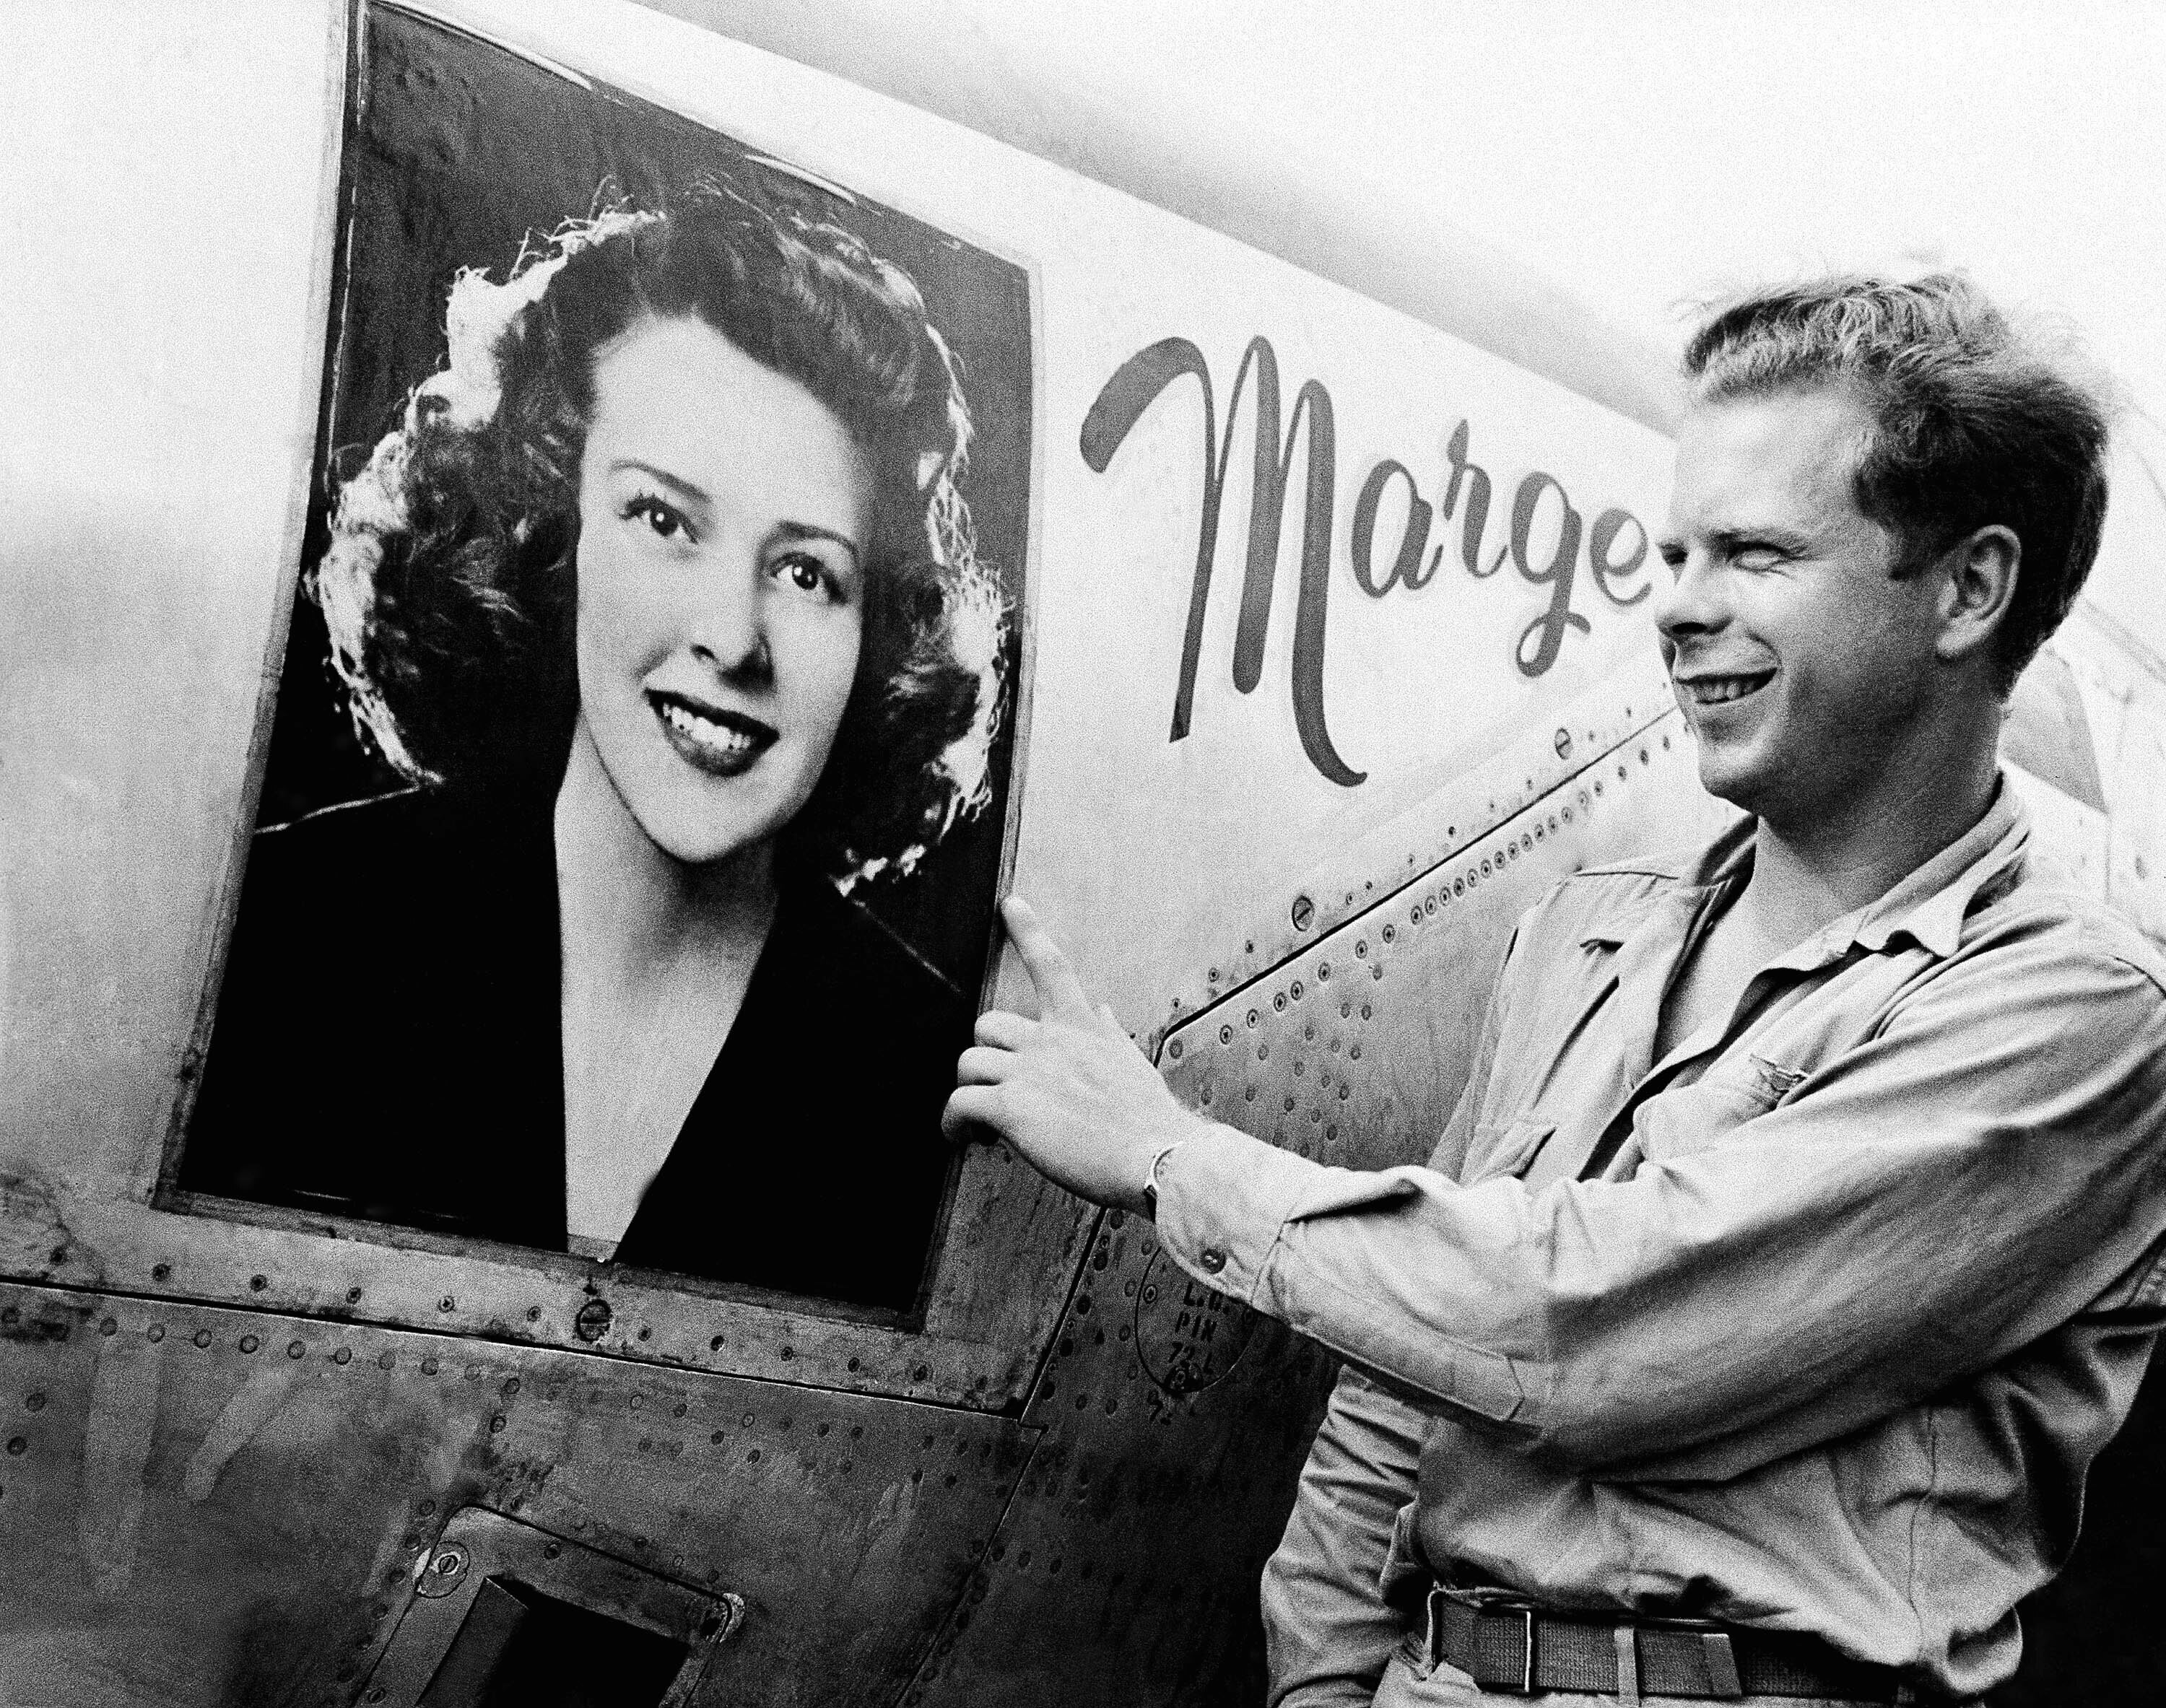 Captain Richard Bong points to a large picture of his girl friend, Marge Vattendahl, on his Lighting P-38 fighter plane pilot stationed at a New Guinea Air Base, March 31, 1944